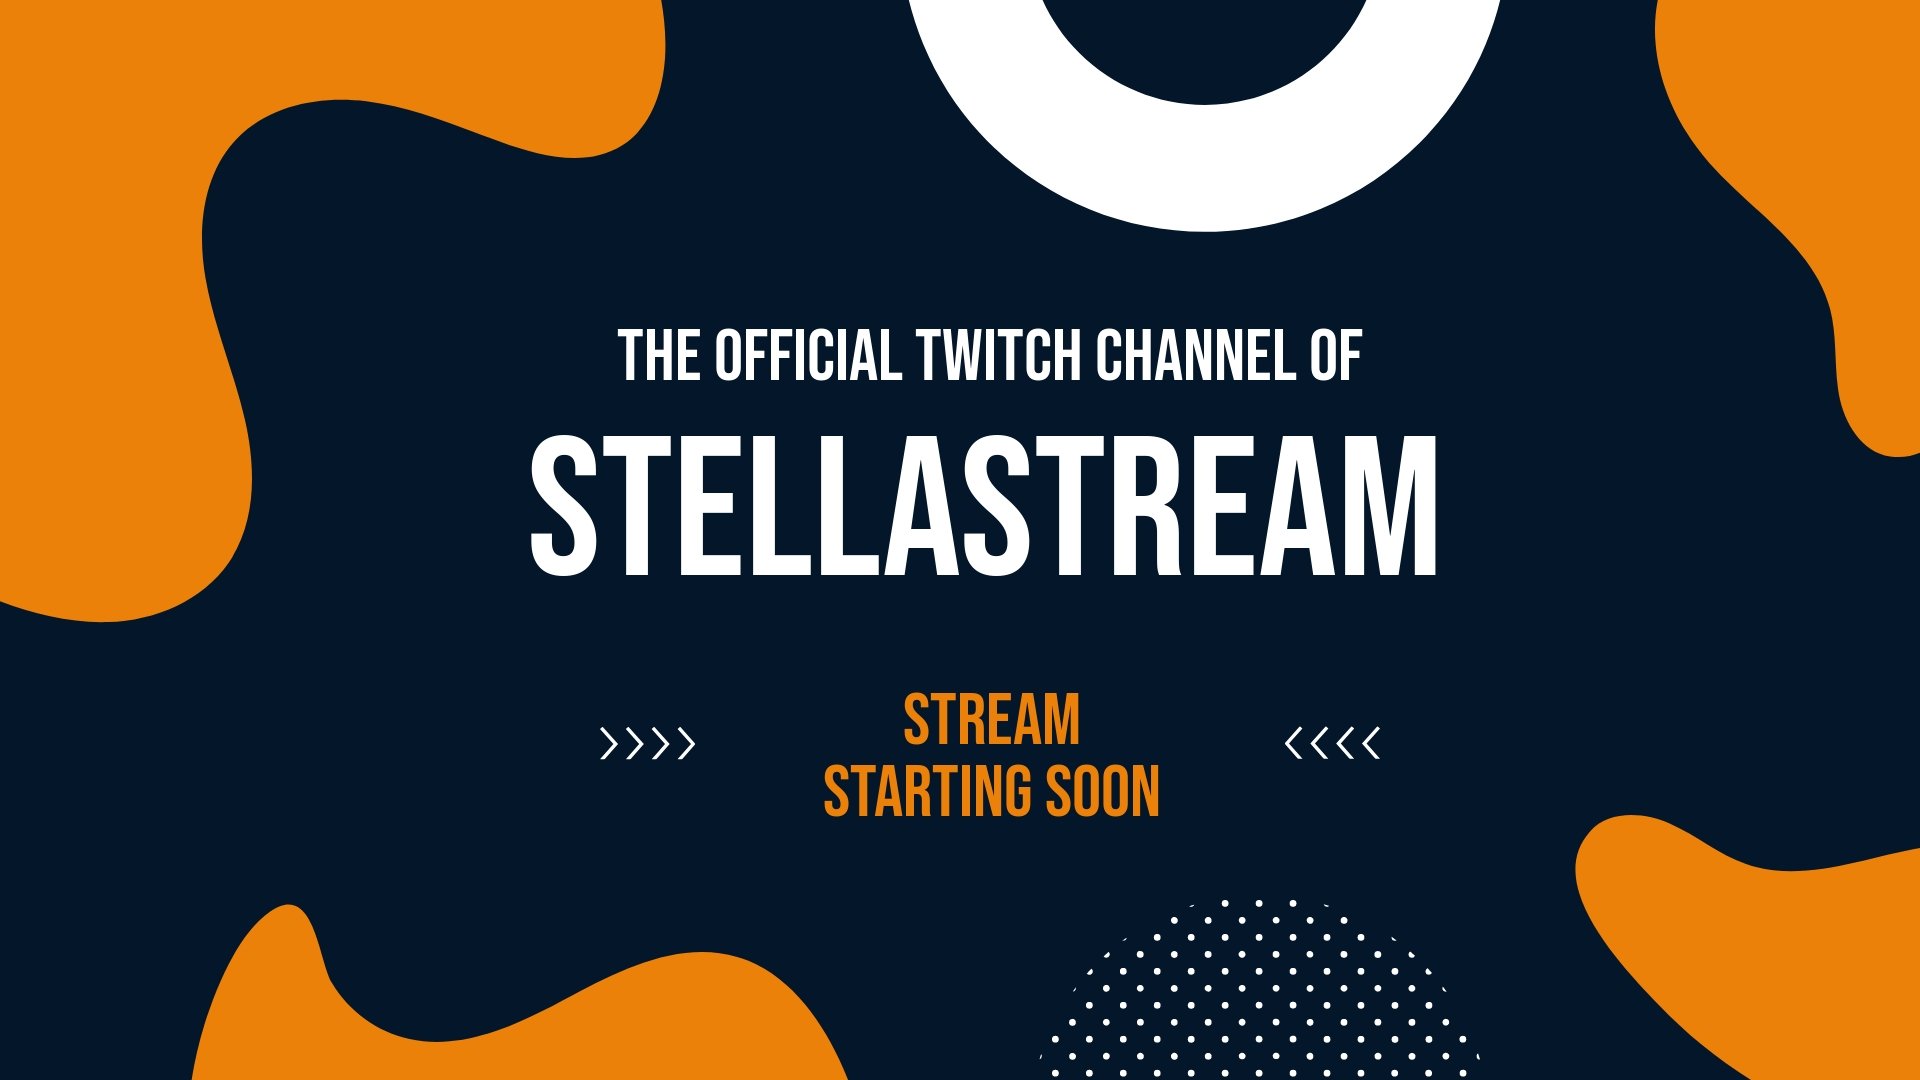 Starting Soon Twitch Template Flyer Template - Bank2home.com